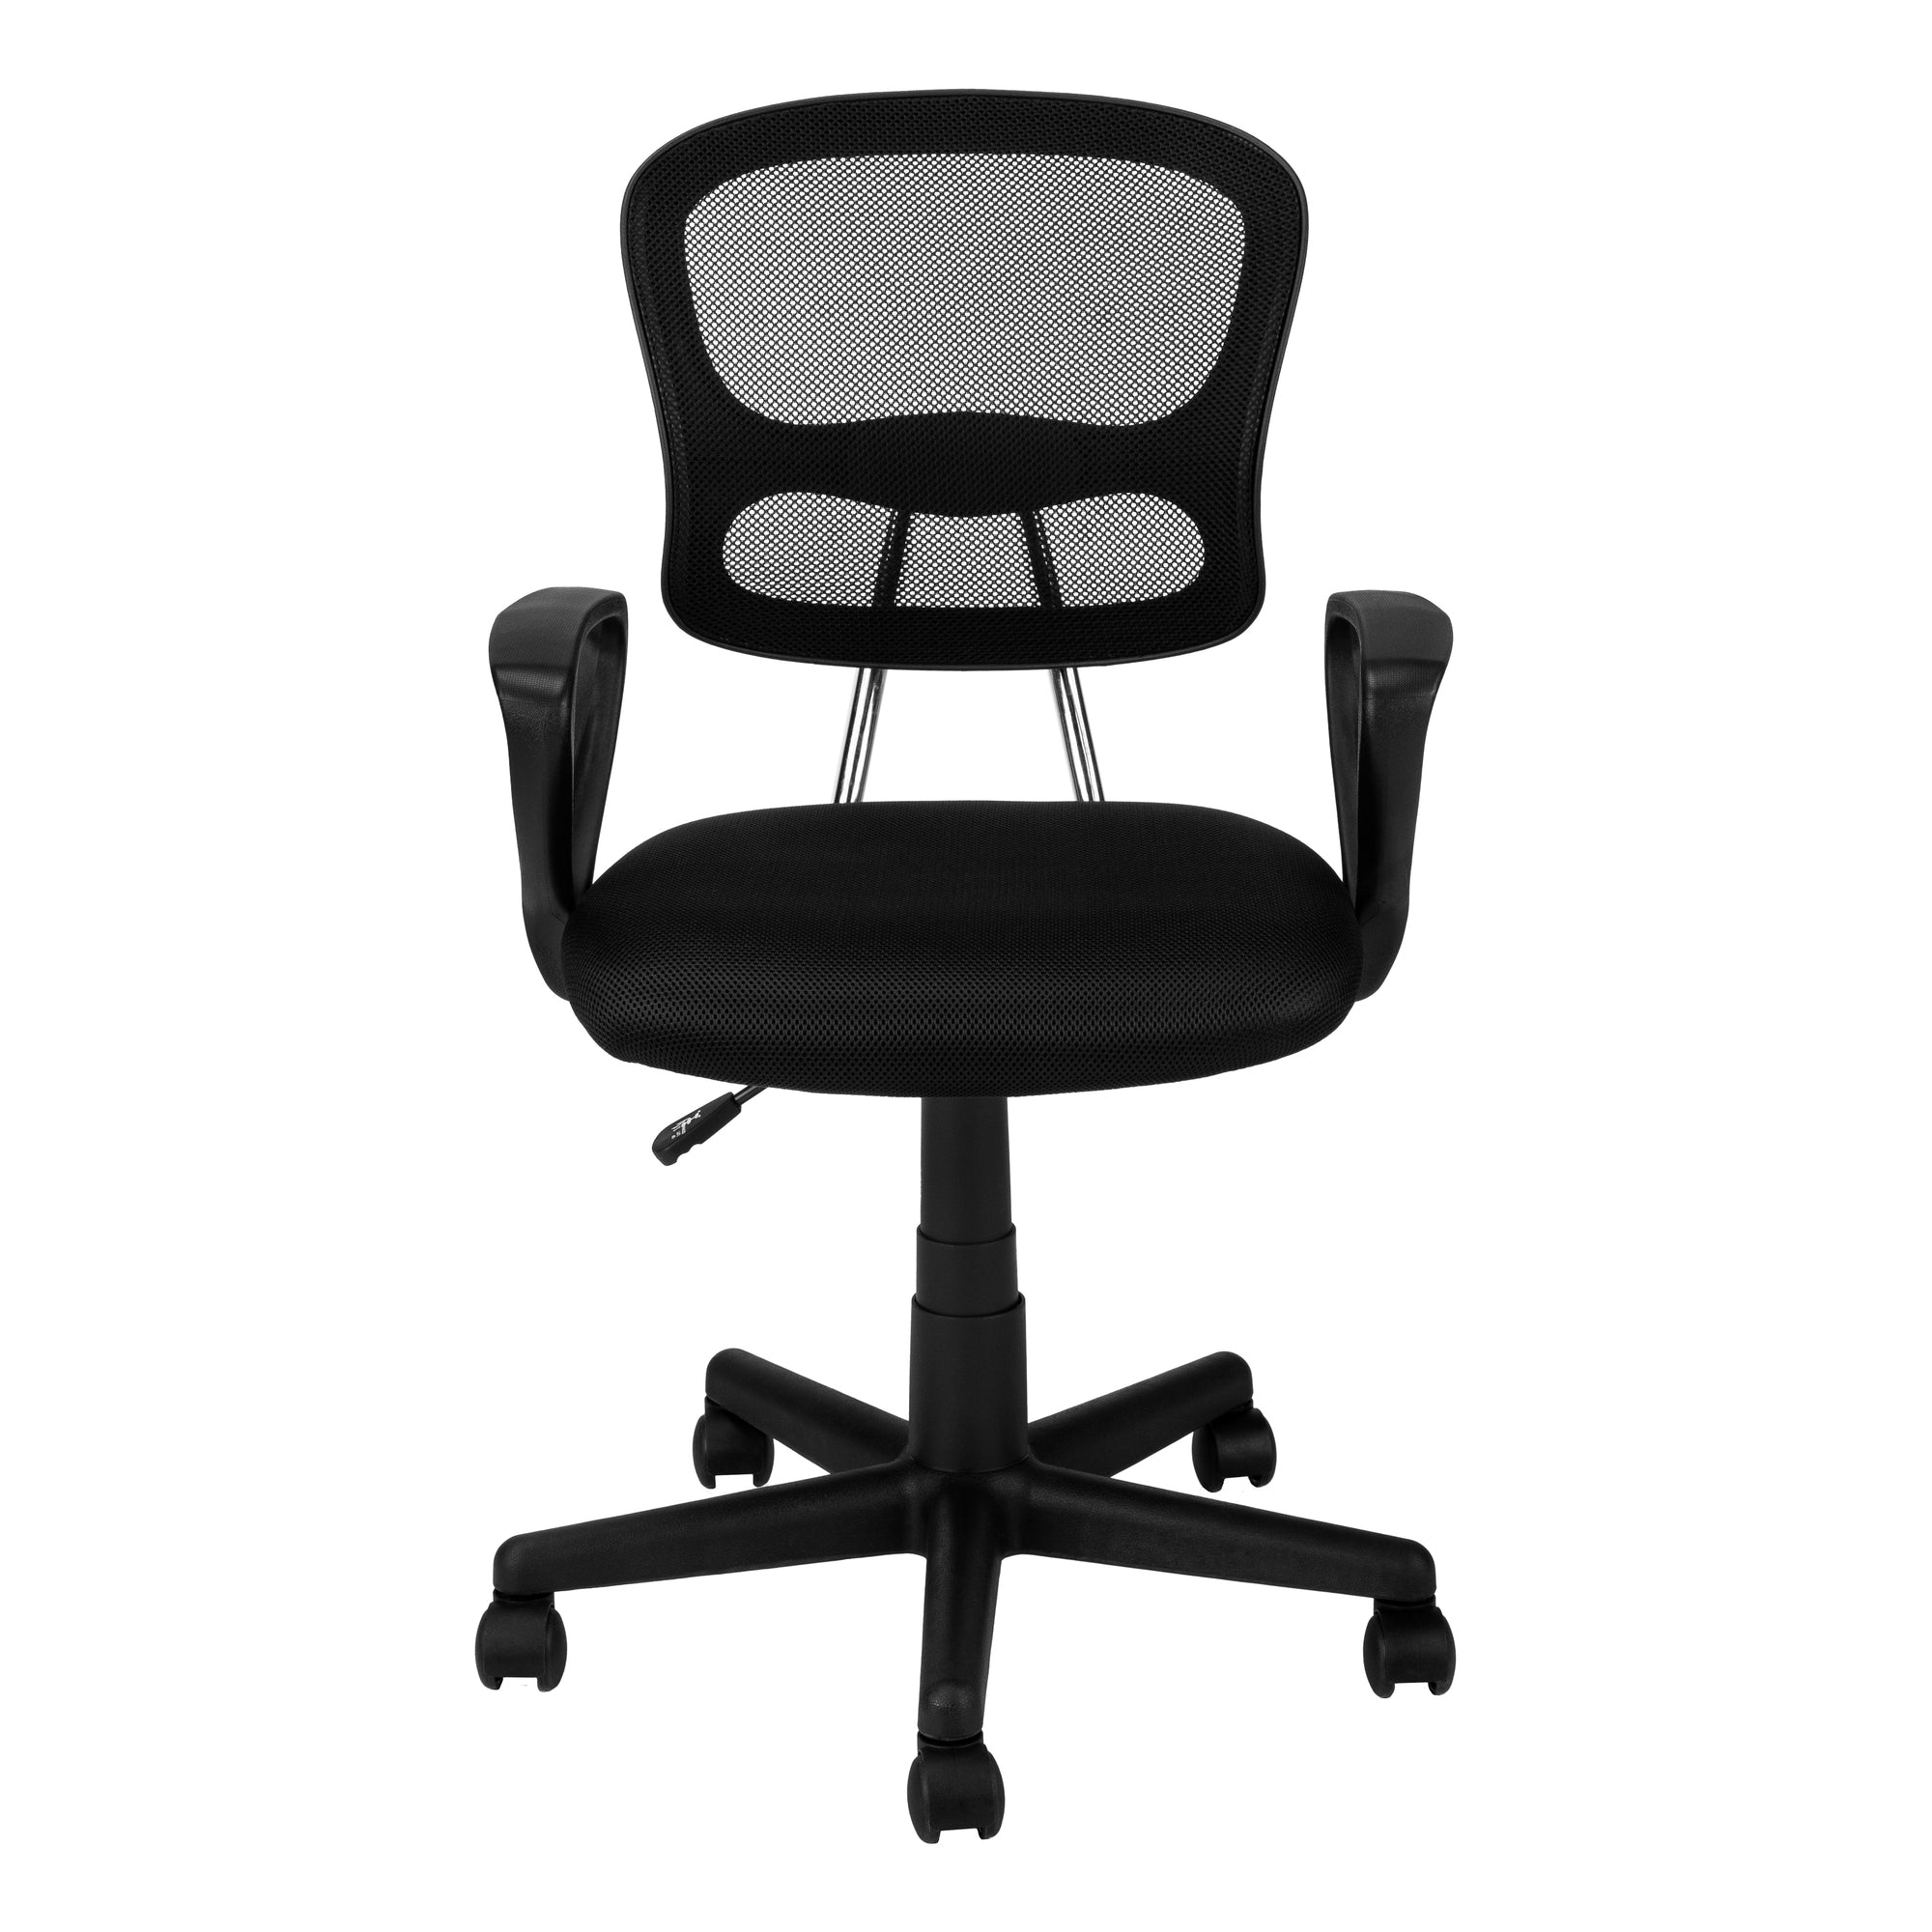 Black-Polyester-Seat-Swivel-Adjustable-Task-Chair-Mesh-Back-Plastic-Frame-Office-Chairs